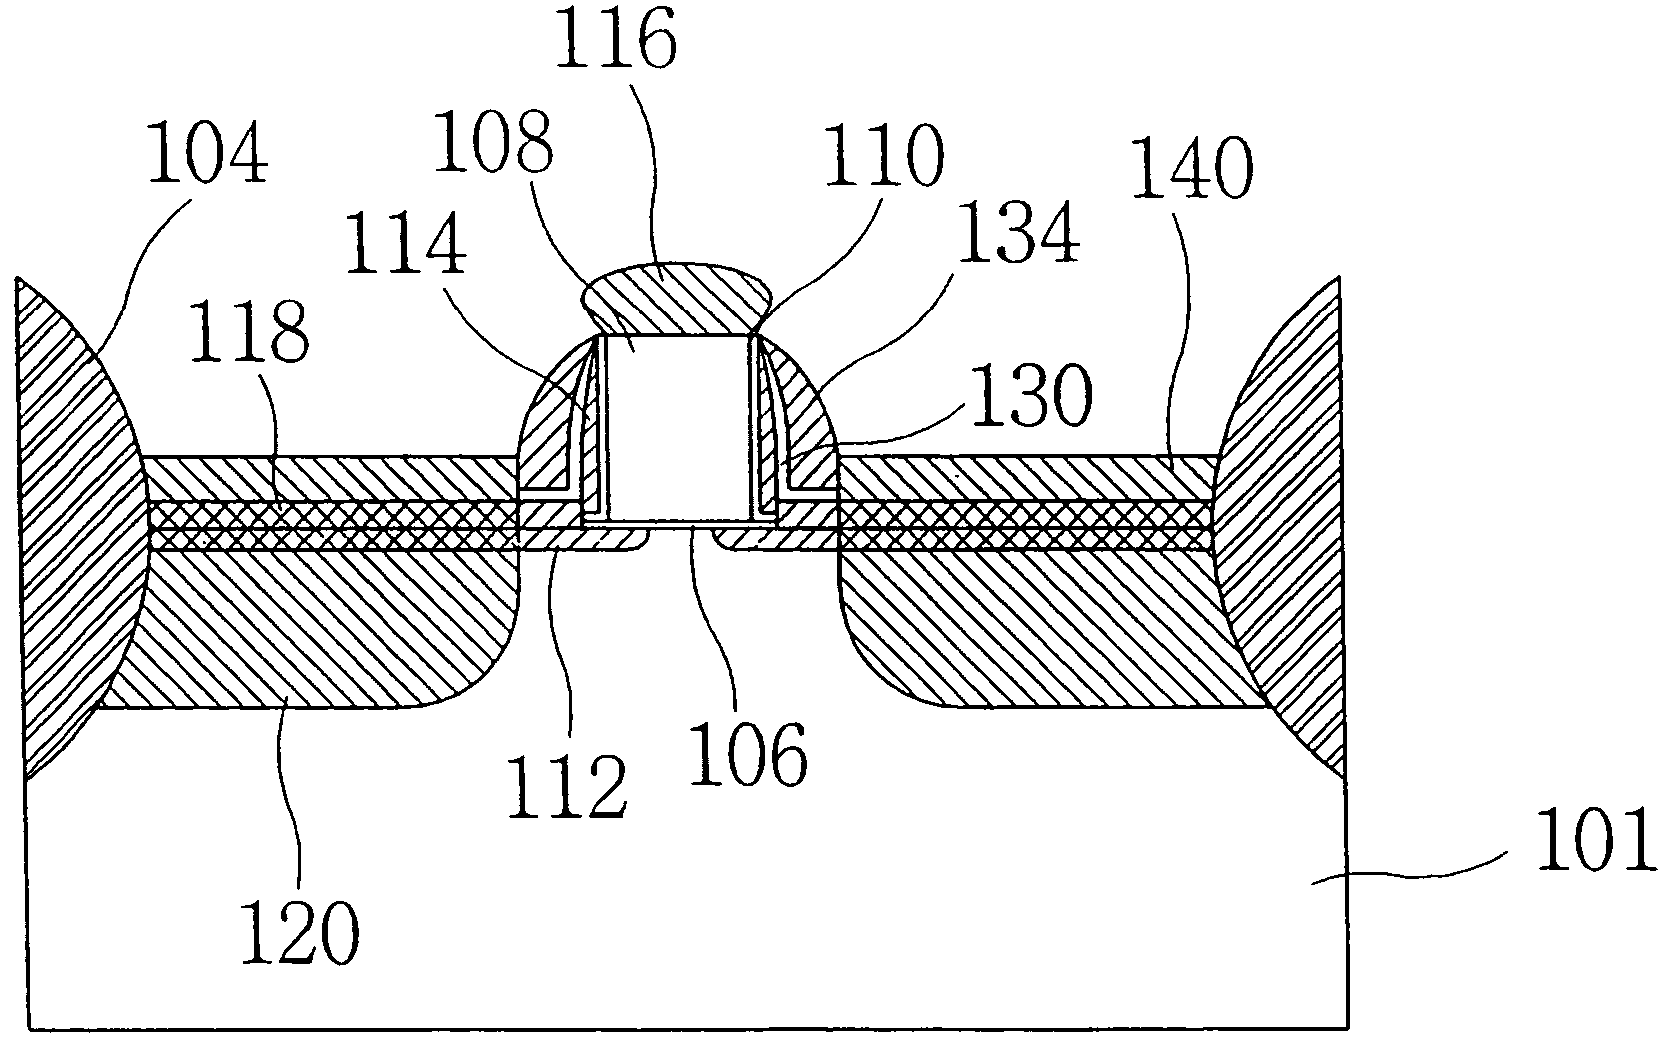 Method of fabricating a MOS transistor with elevated source/drain structure using a selective epitaxial growth process